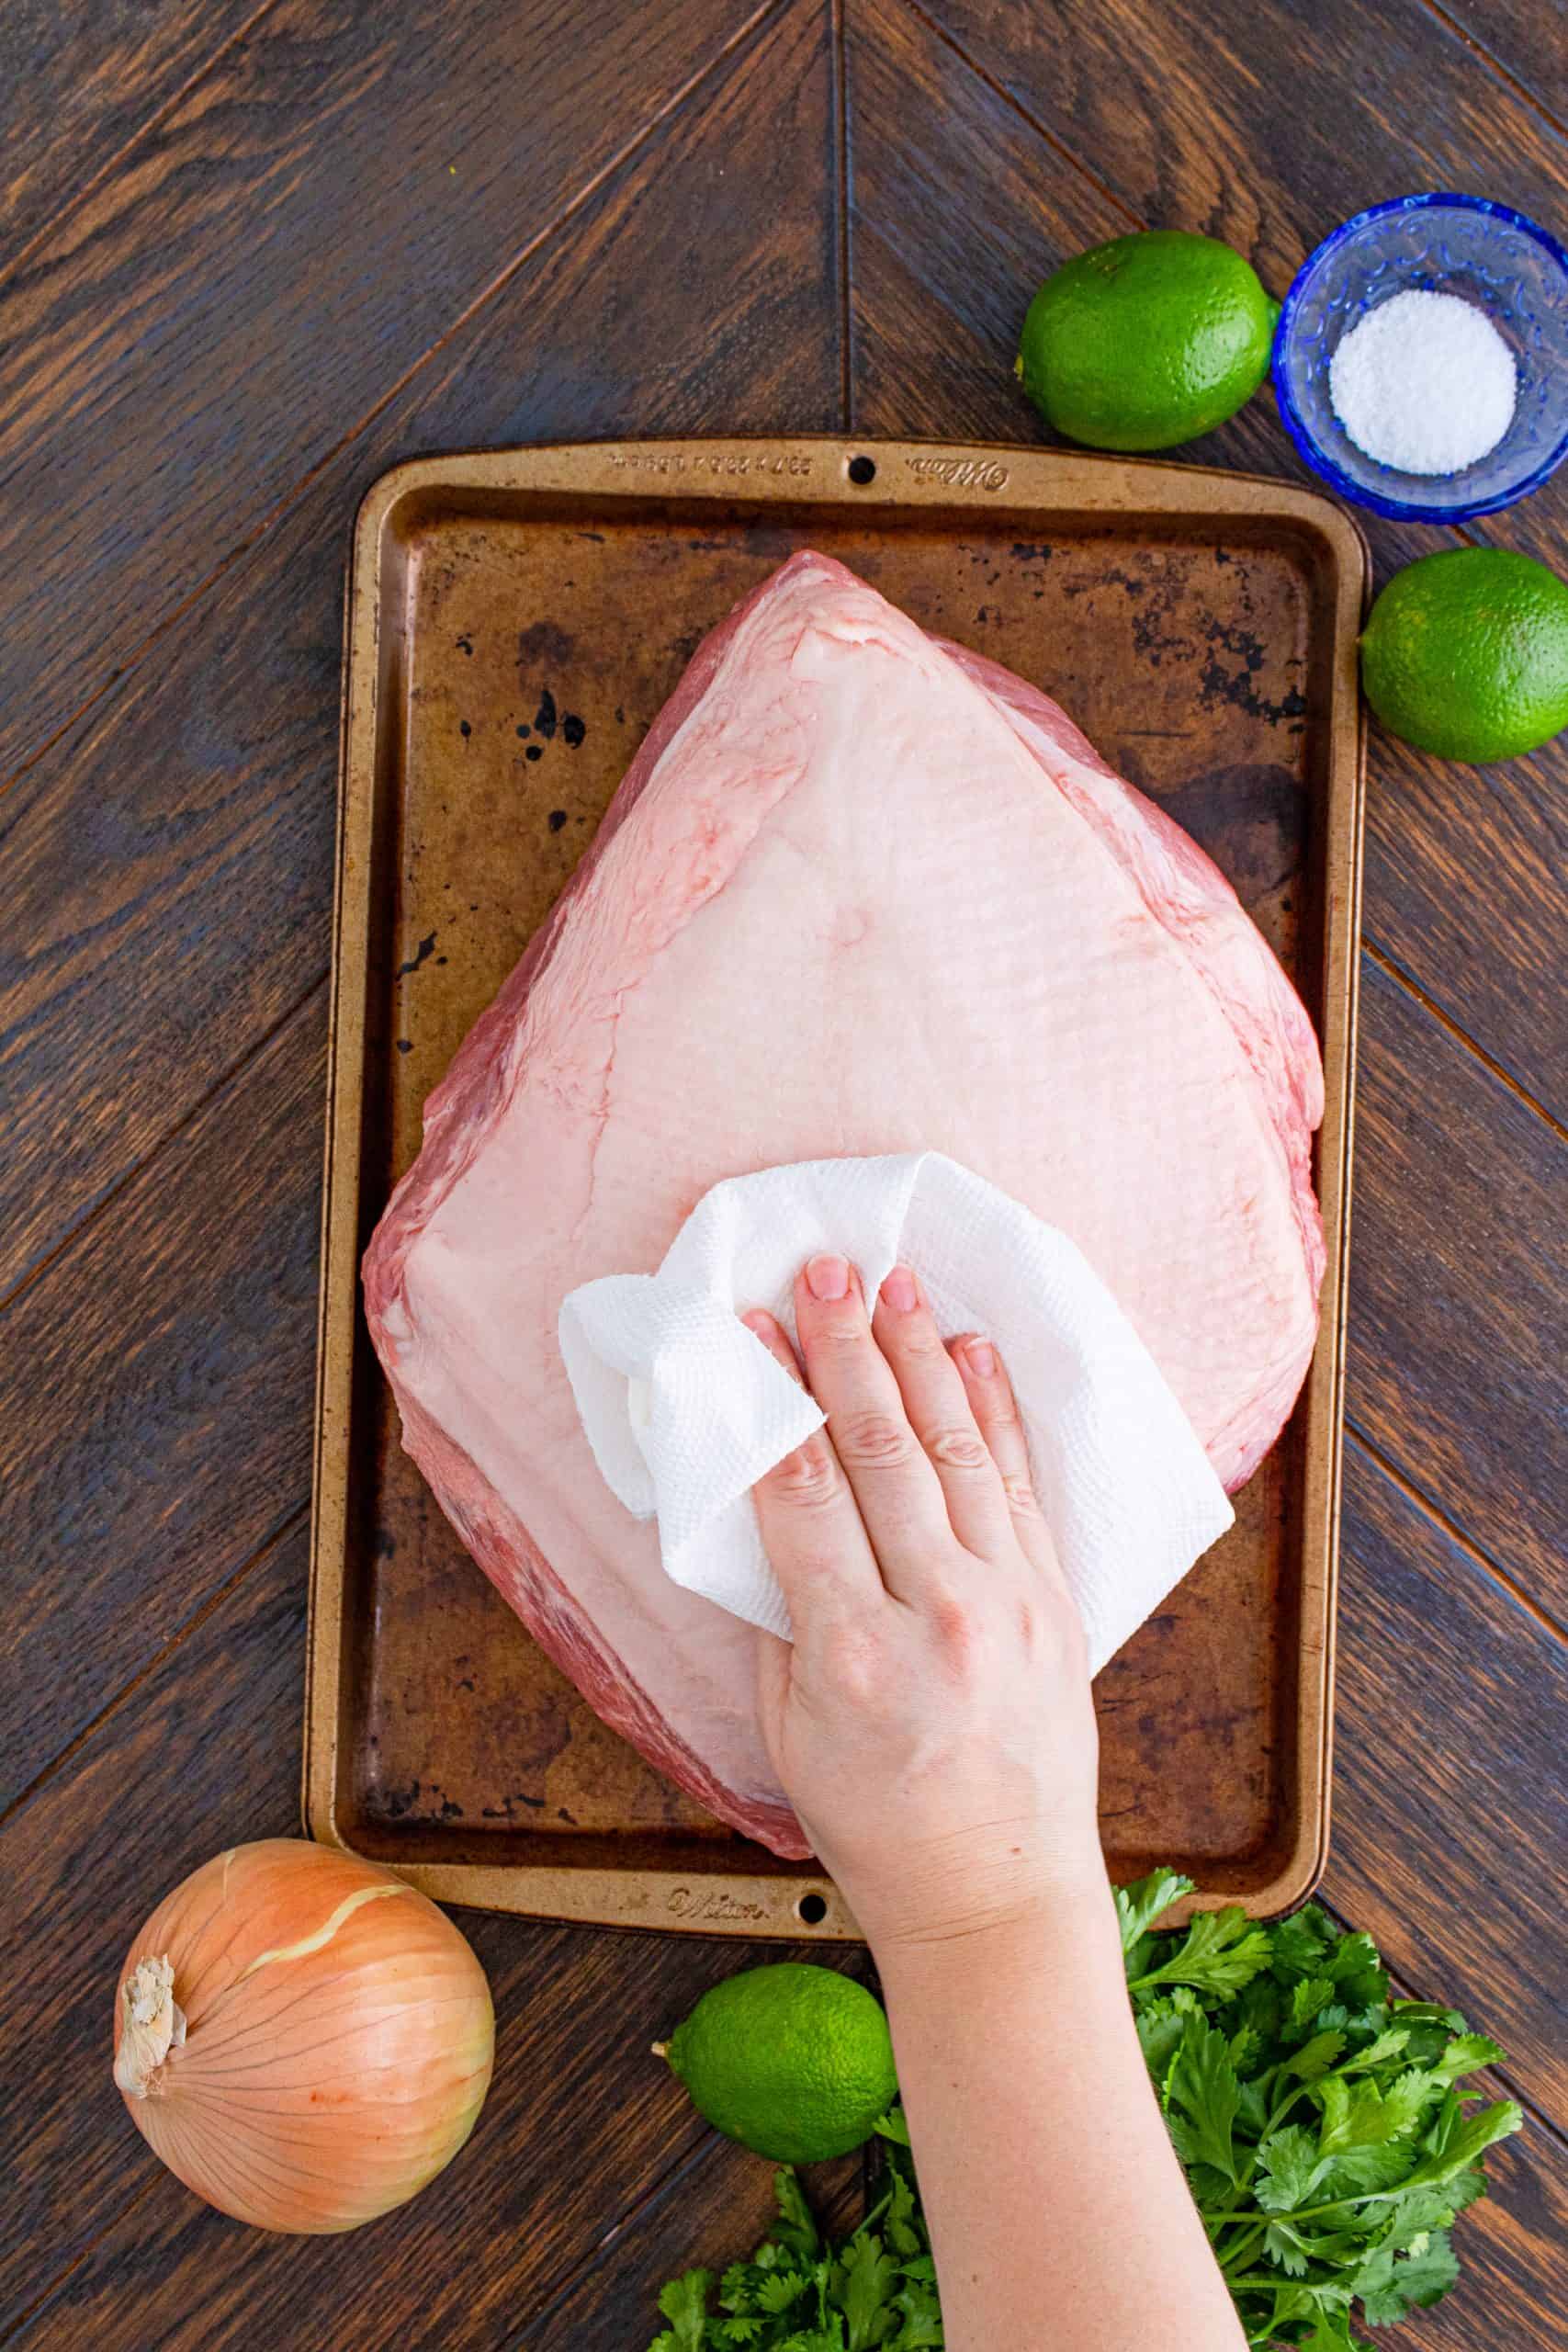 patting a pork roast with a paper towel to dry.